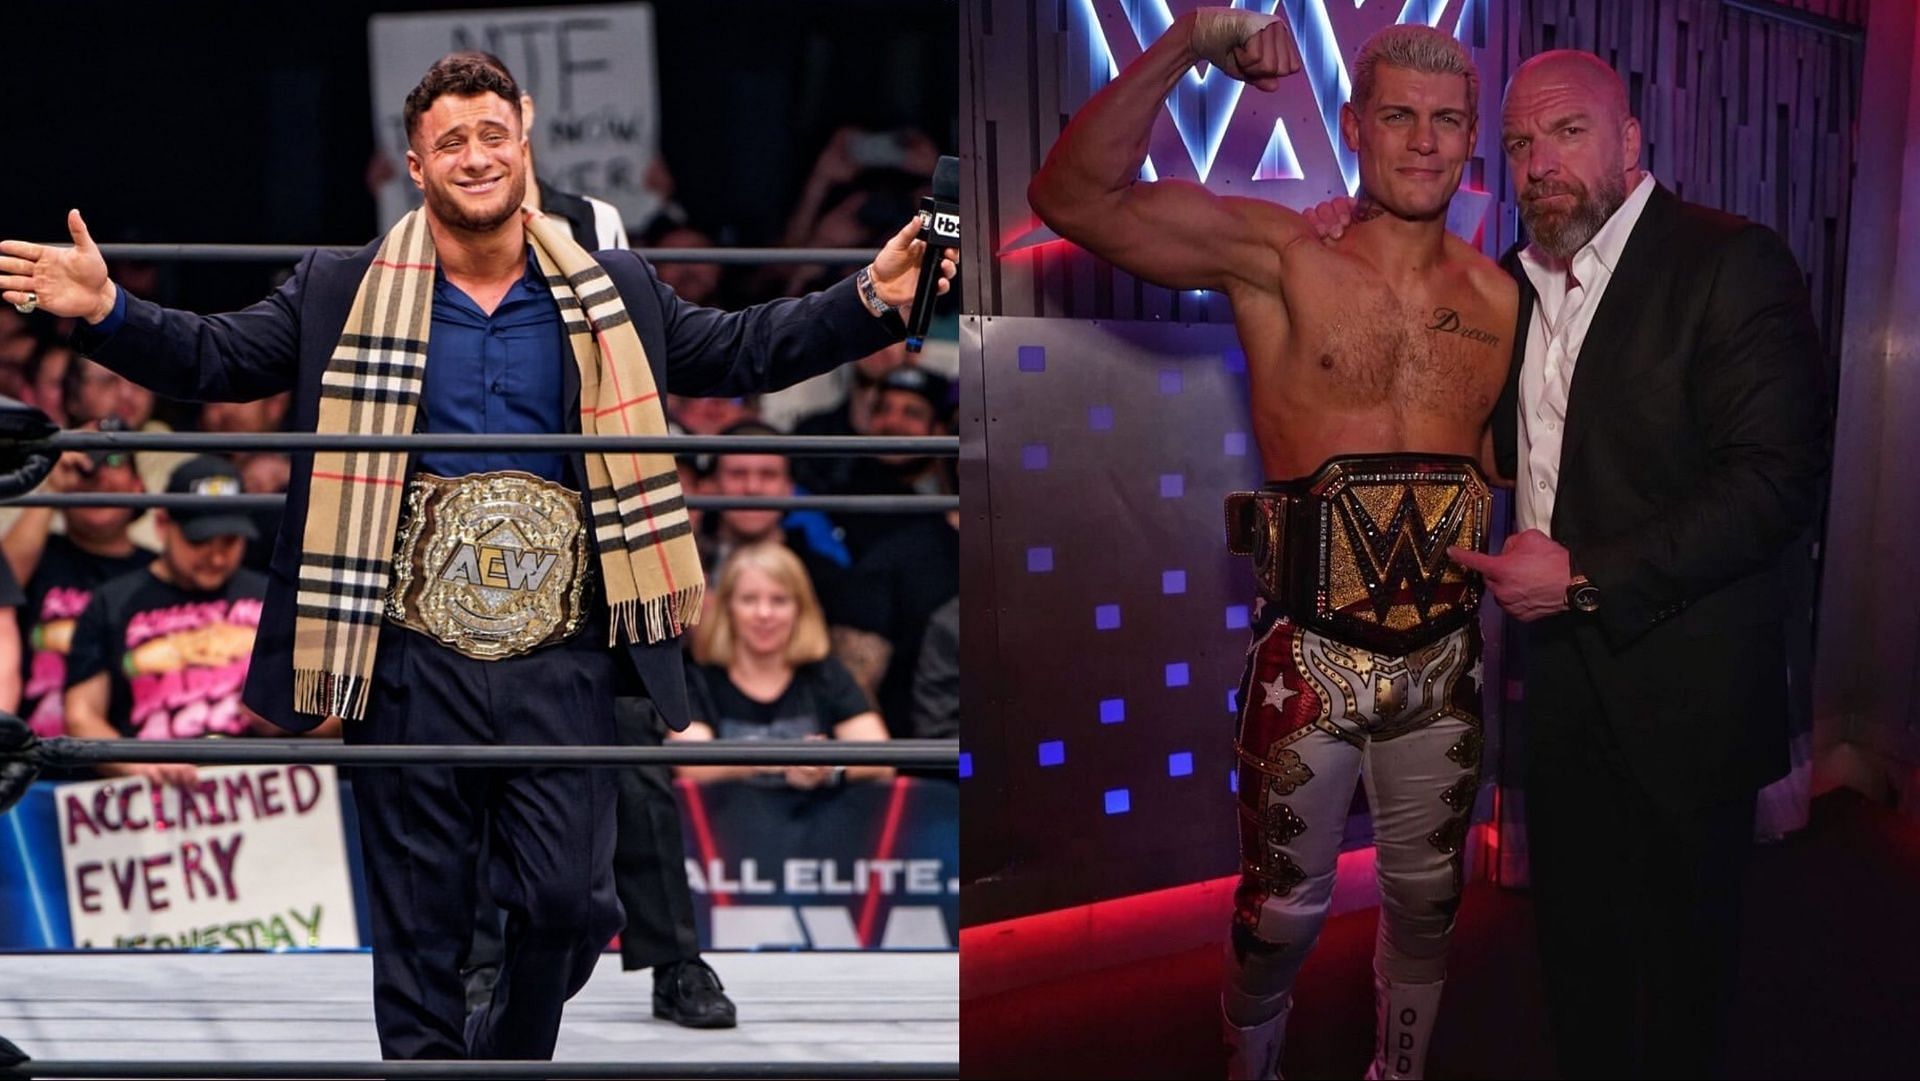 Will MJF sign with WWE and go after Cody Rhodes?